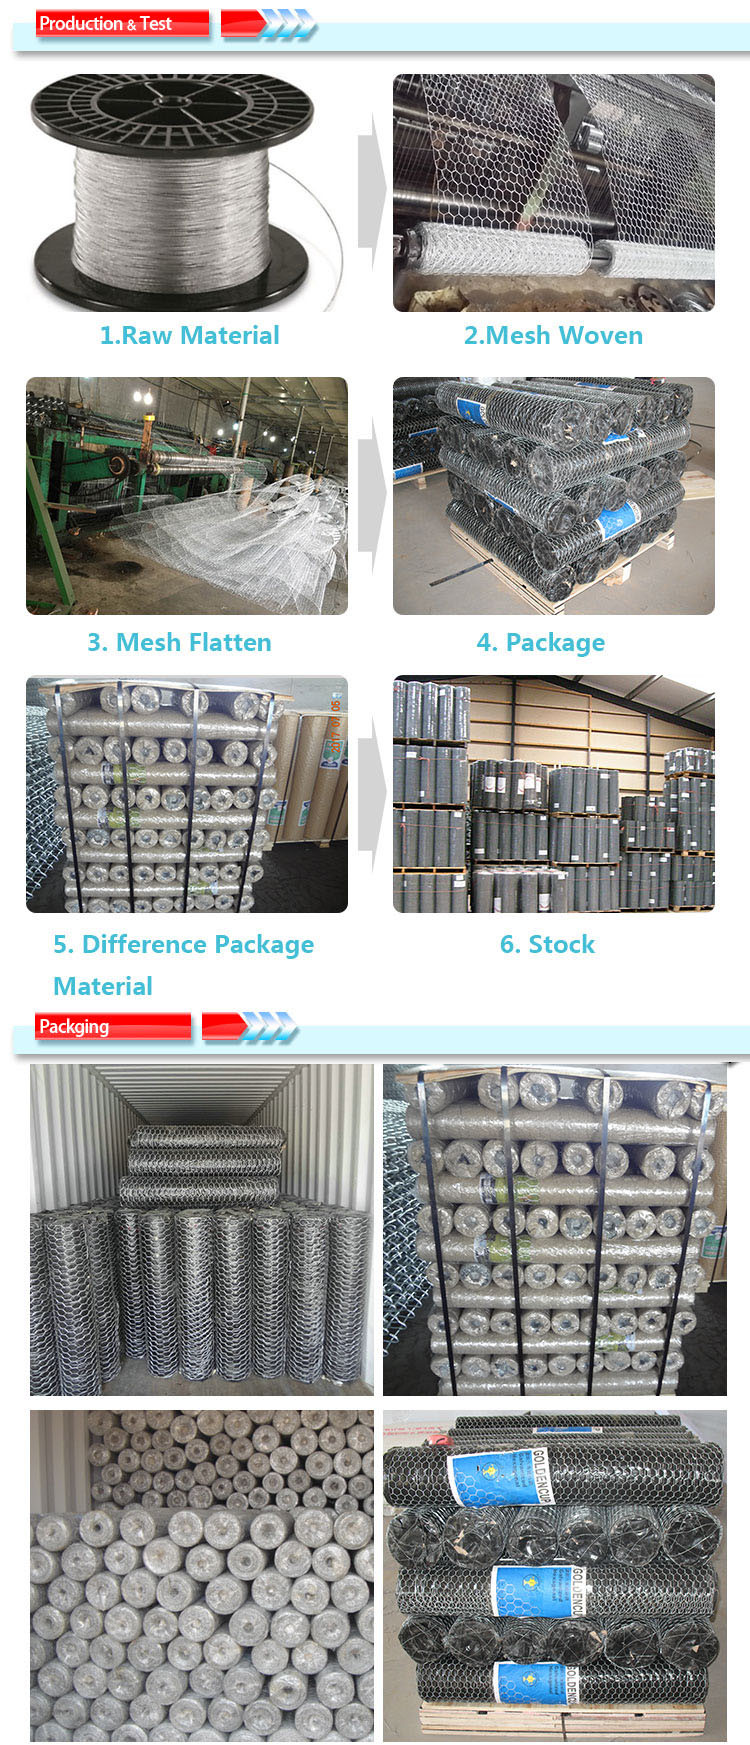 Galvanized Hexagonal Wire Mesh with Low Carbon Wire for Plaster